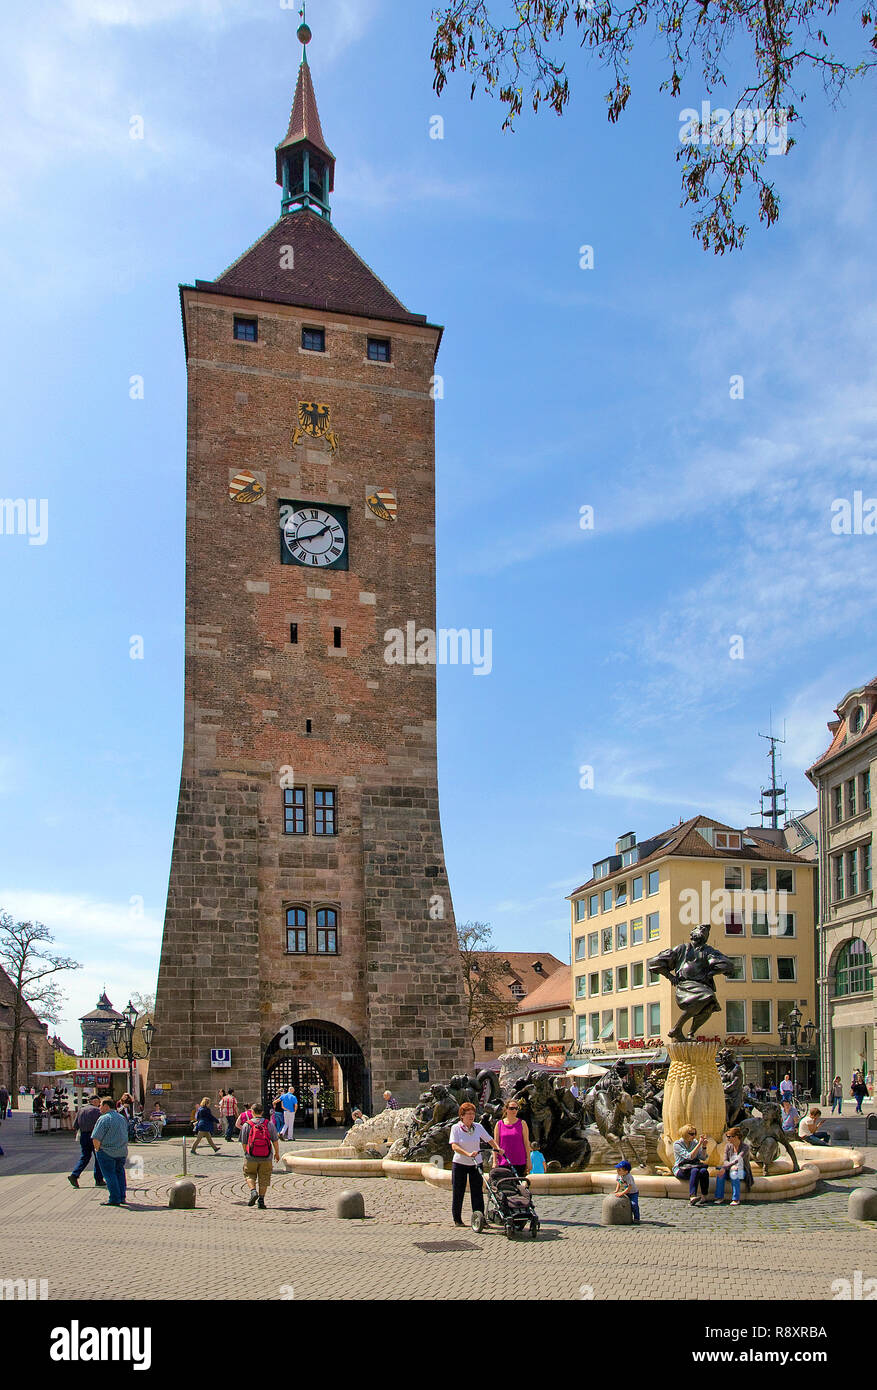 White tower and marriage roundabout fountain (german: Ehekarussell), Nuremberg, Franconia, Bavaria, Germany, Europe Stock Photo